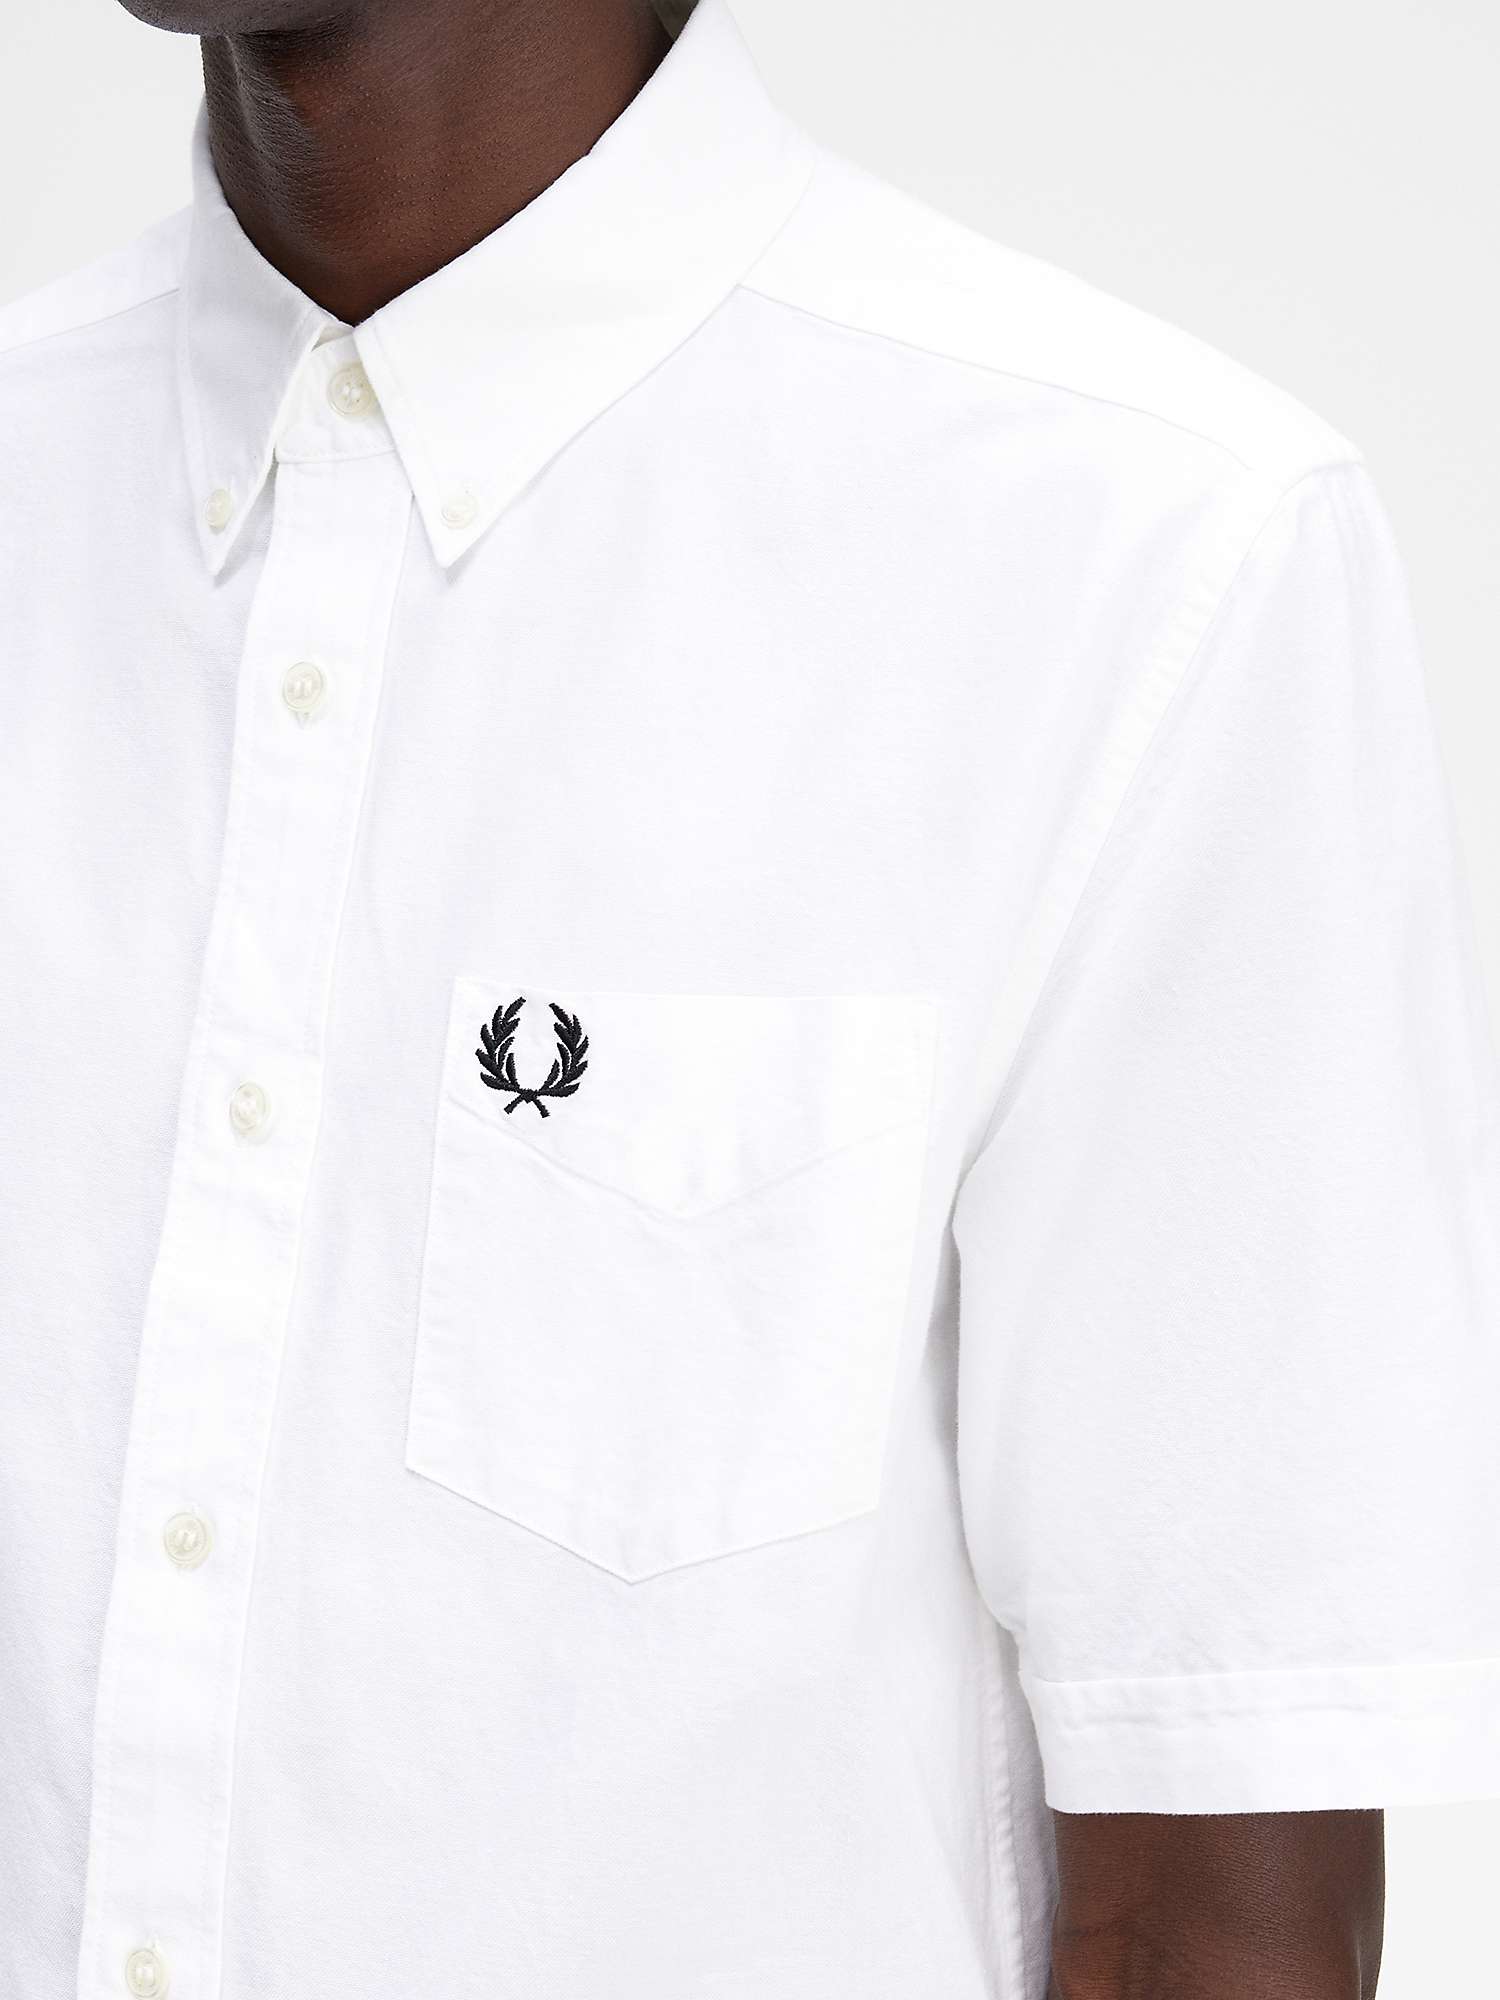 Buy Fred Perry Cotton Short Sleeve Oxford Shirt Online at johnlewis.com